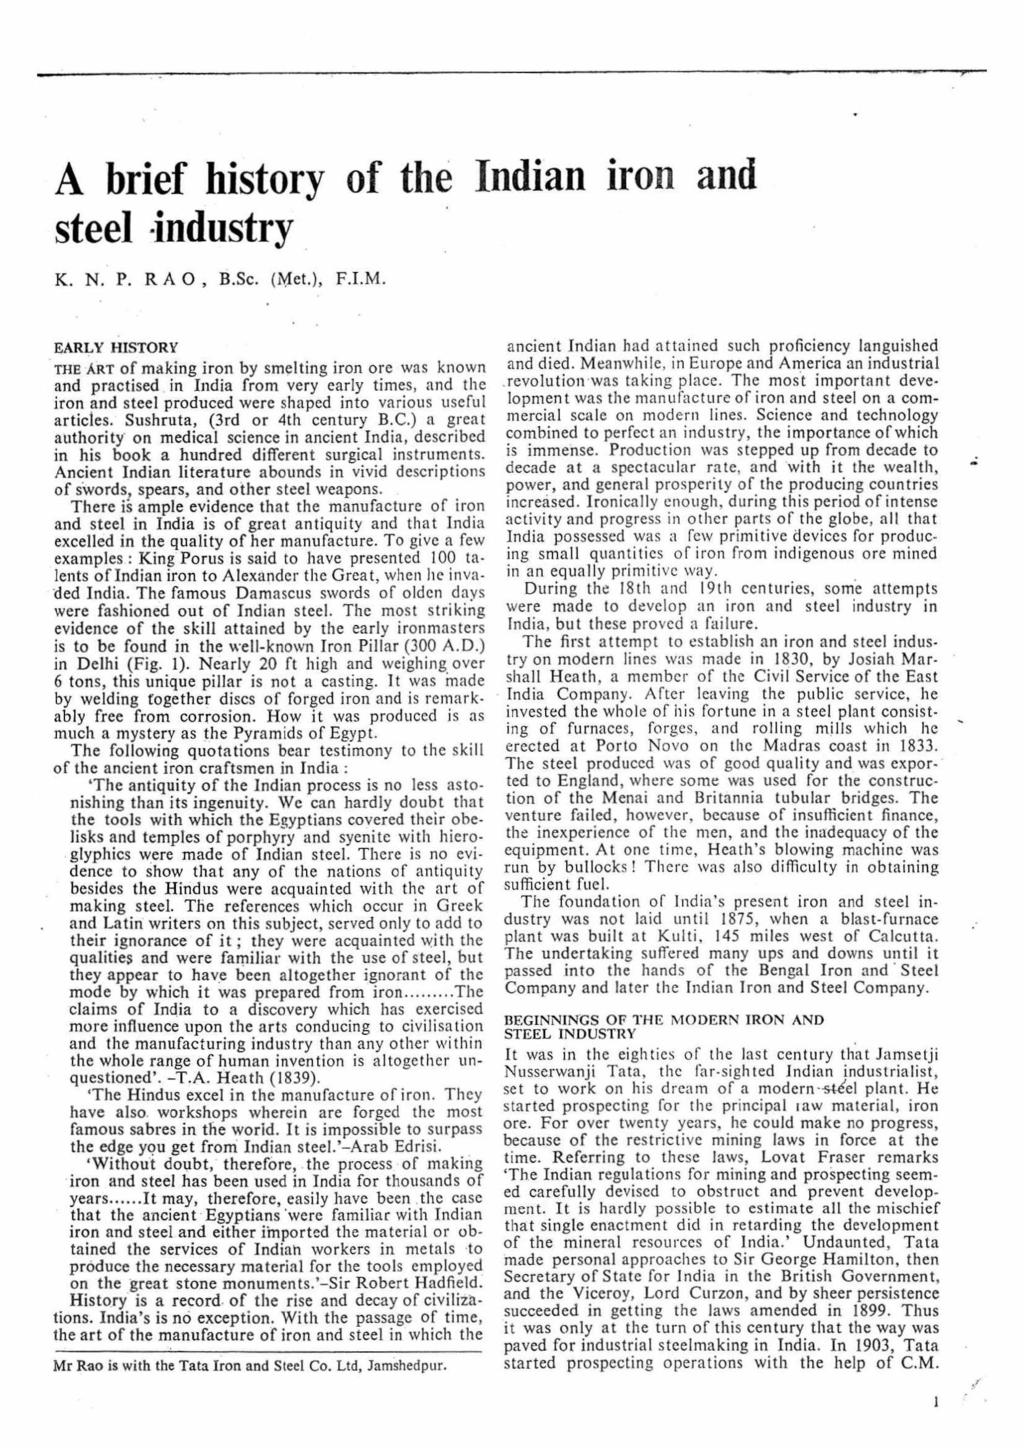 A bief histoy of the Indian ion and steel industy K. N. P. R A 0, B.Sc. (Me